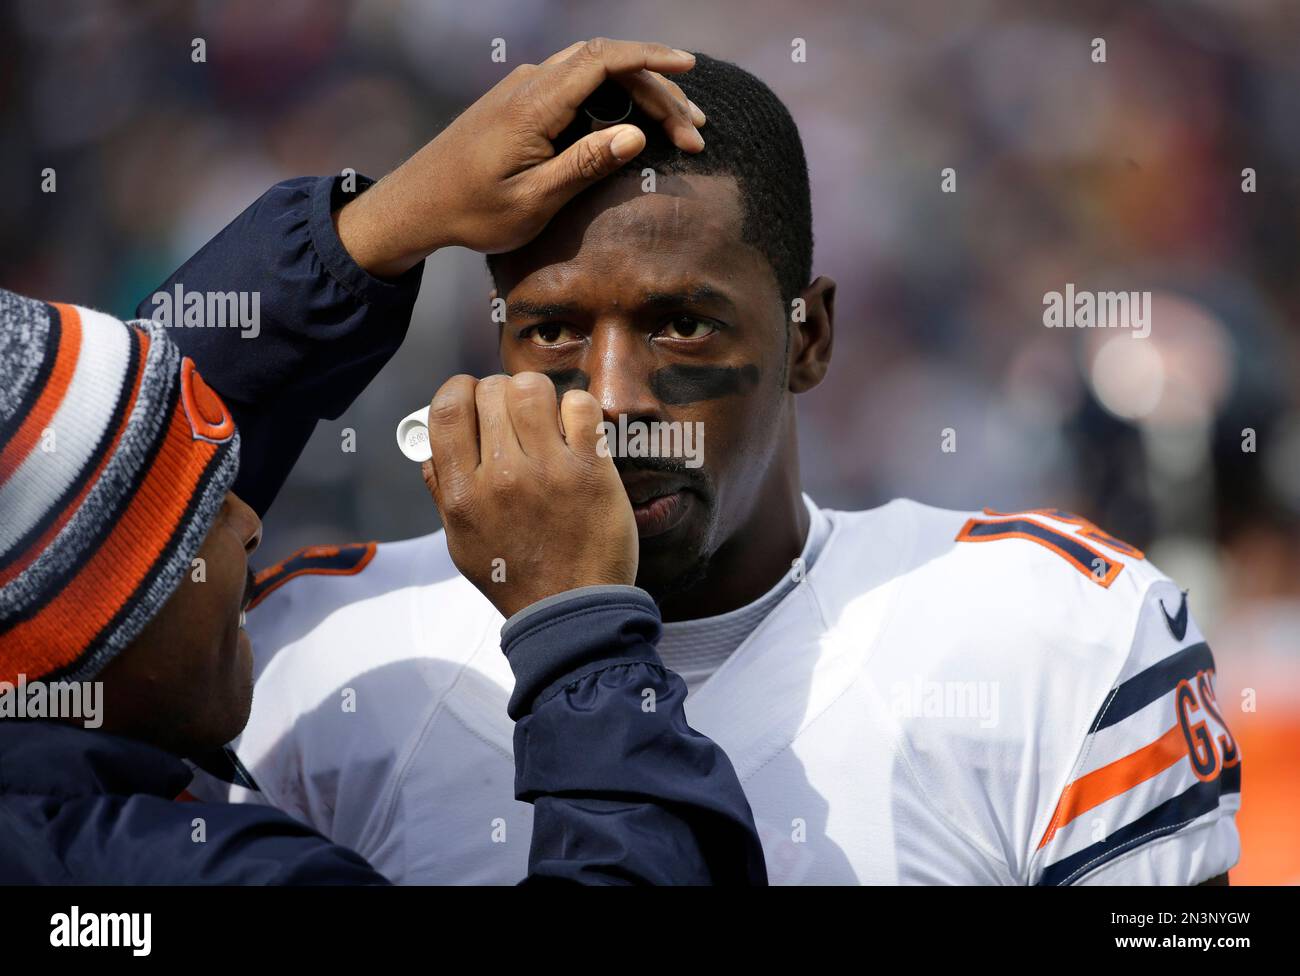 Chicago Bears wide receiver Josh Morgan (19) has eye black applied to his  eyes before an NFL football game against the New England Patriots on  Sunday, Oct. 26, 2014, in Foxborough, Mass. (